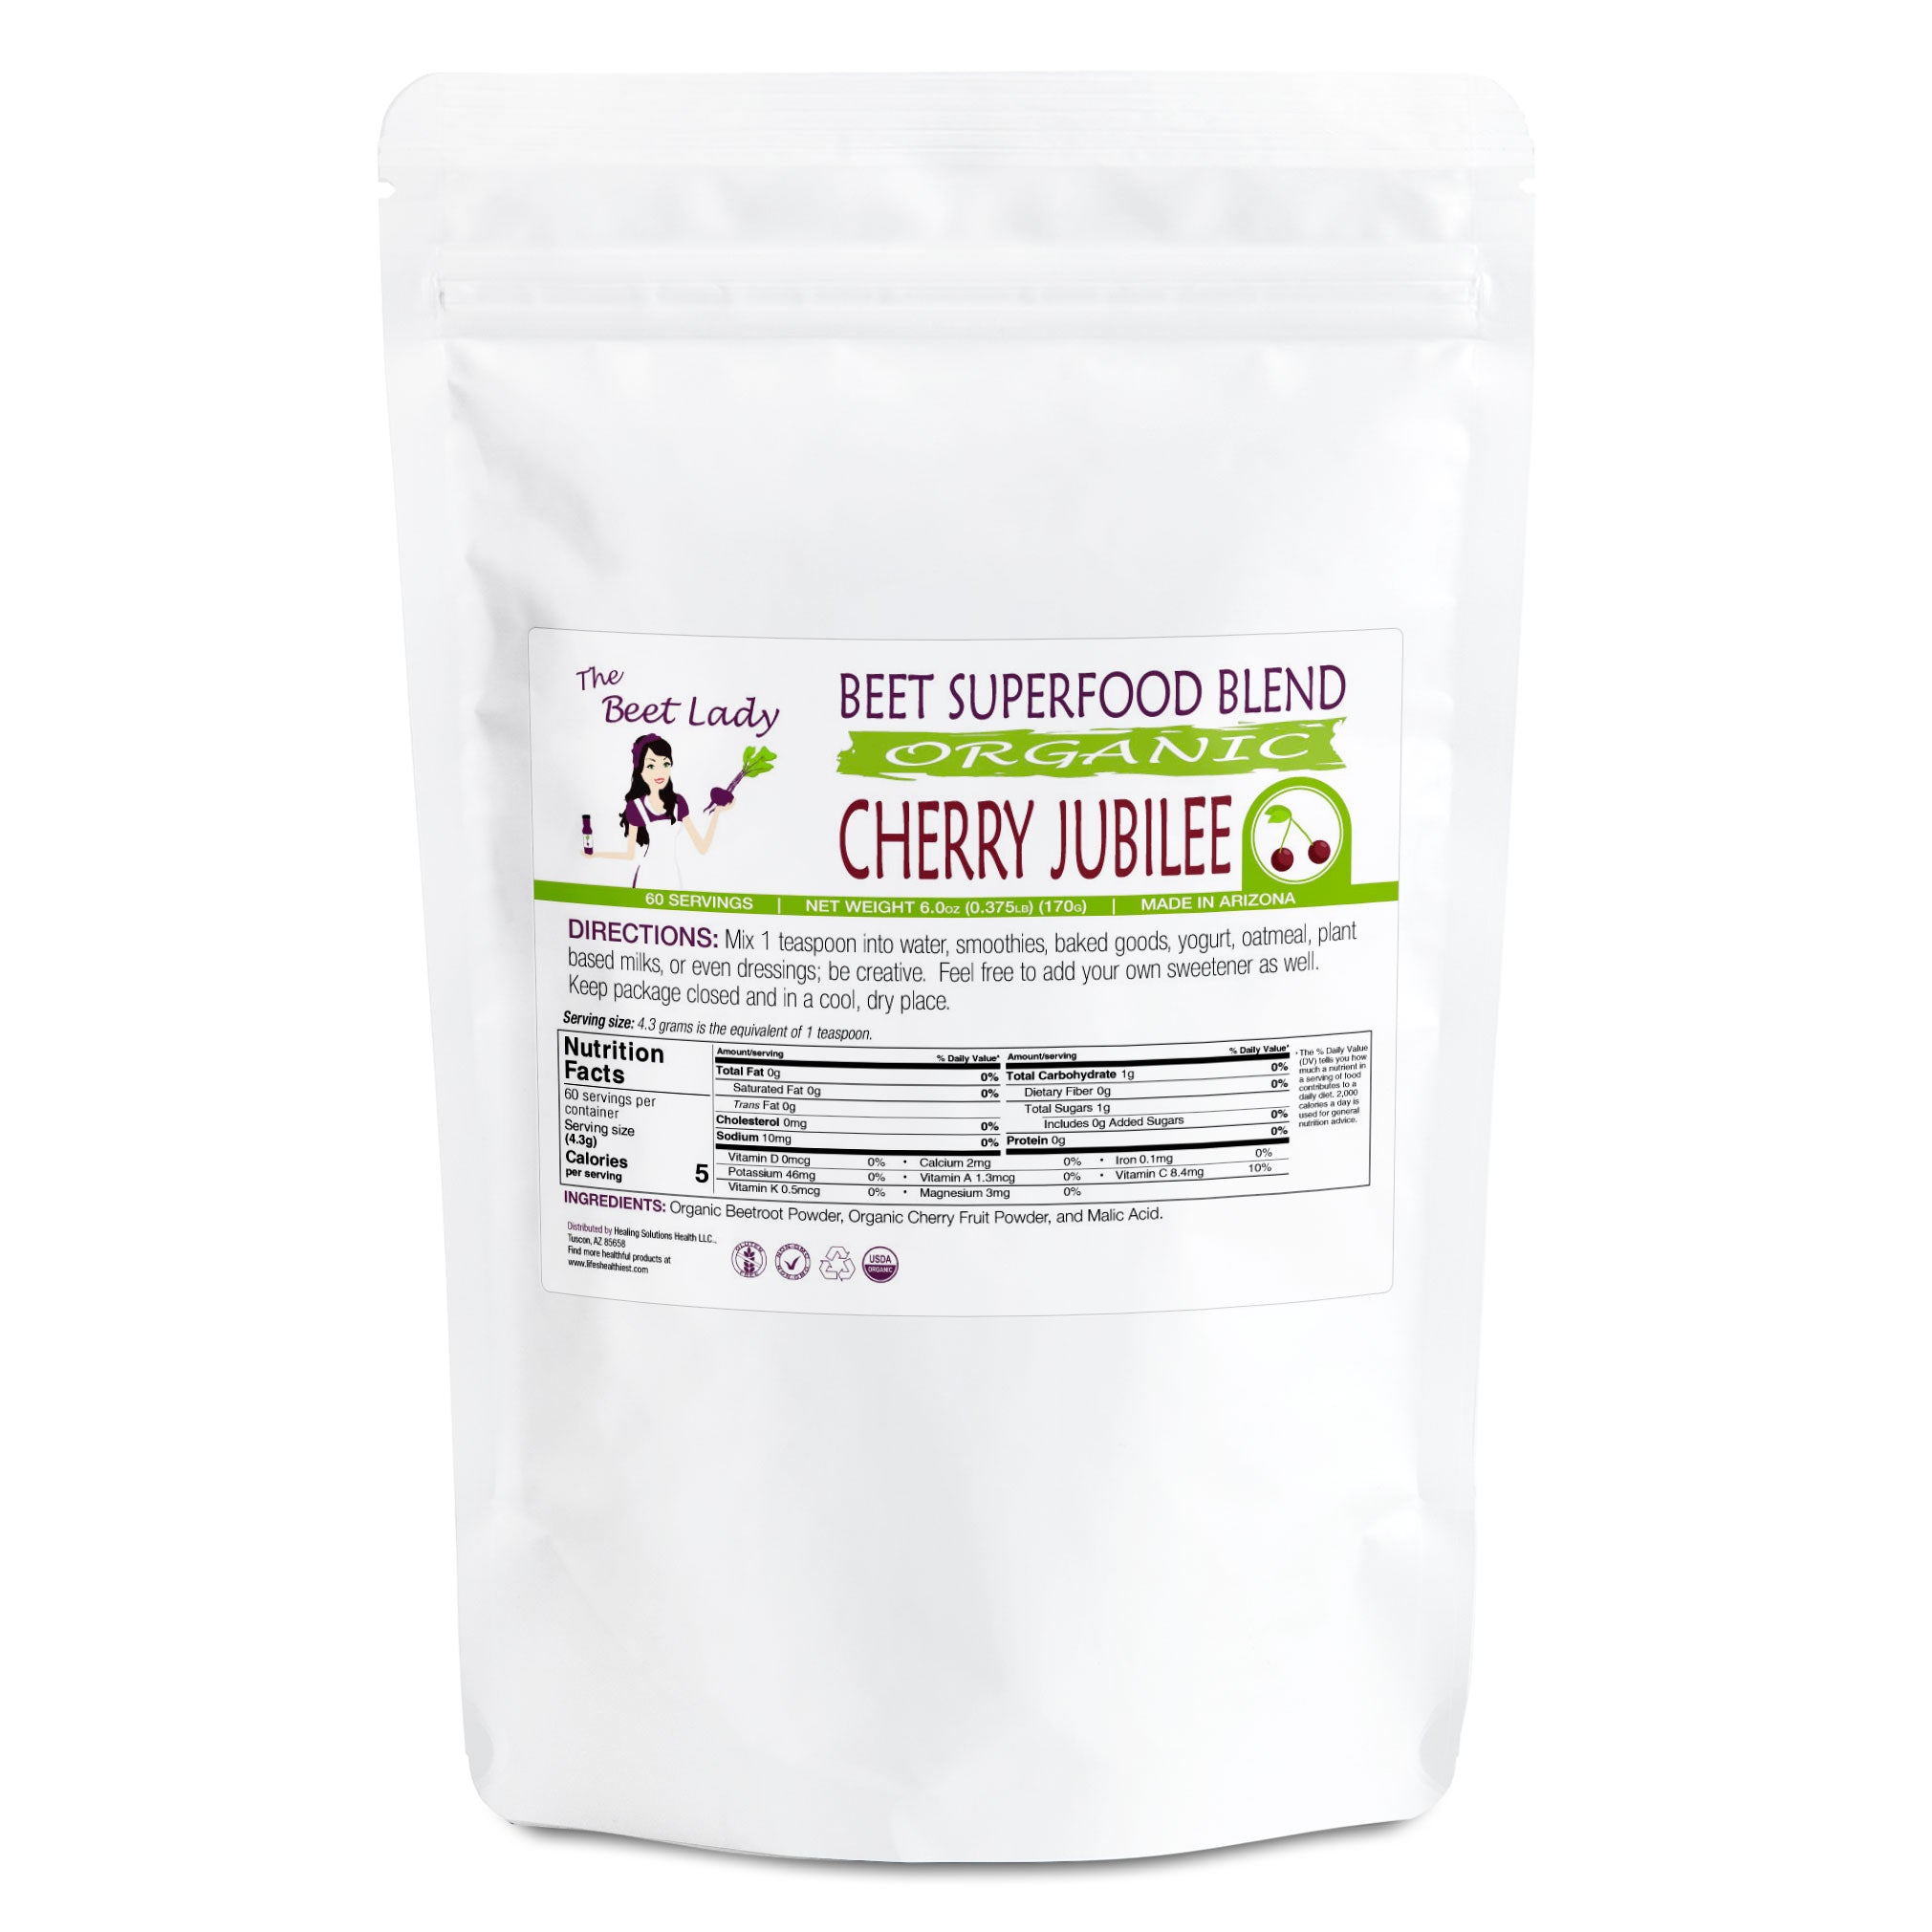 The Beet Lady CHERRY JUBILEE Beet Food Nutritional Therapy powder blended with real fruit - 100% bio-available nutrients from good food. Organic, plant-based, non-GMO, clean and raw.